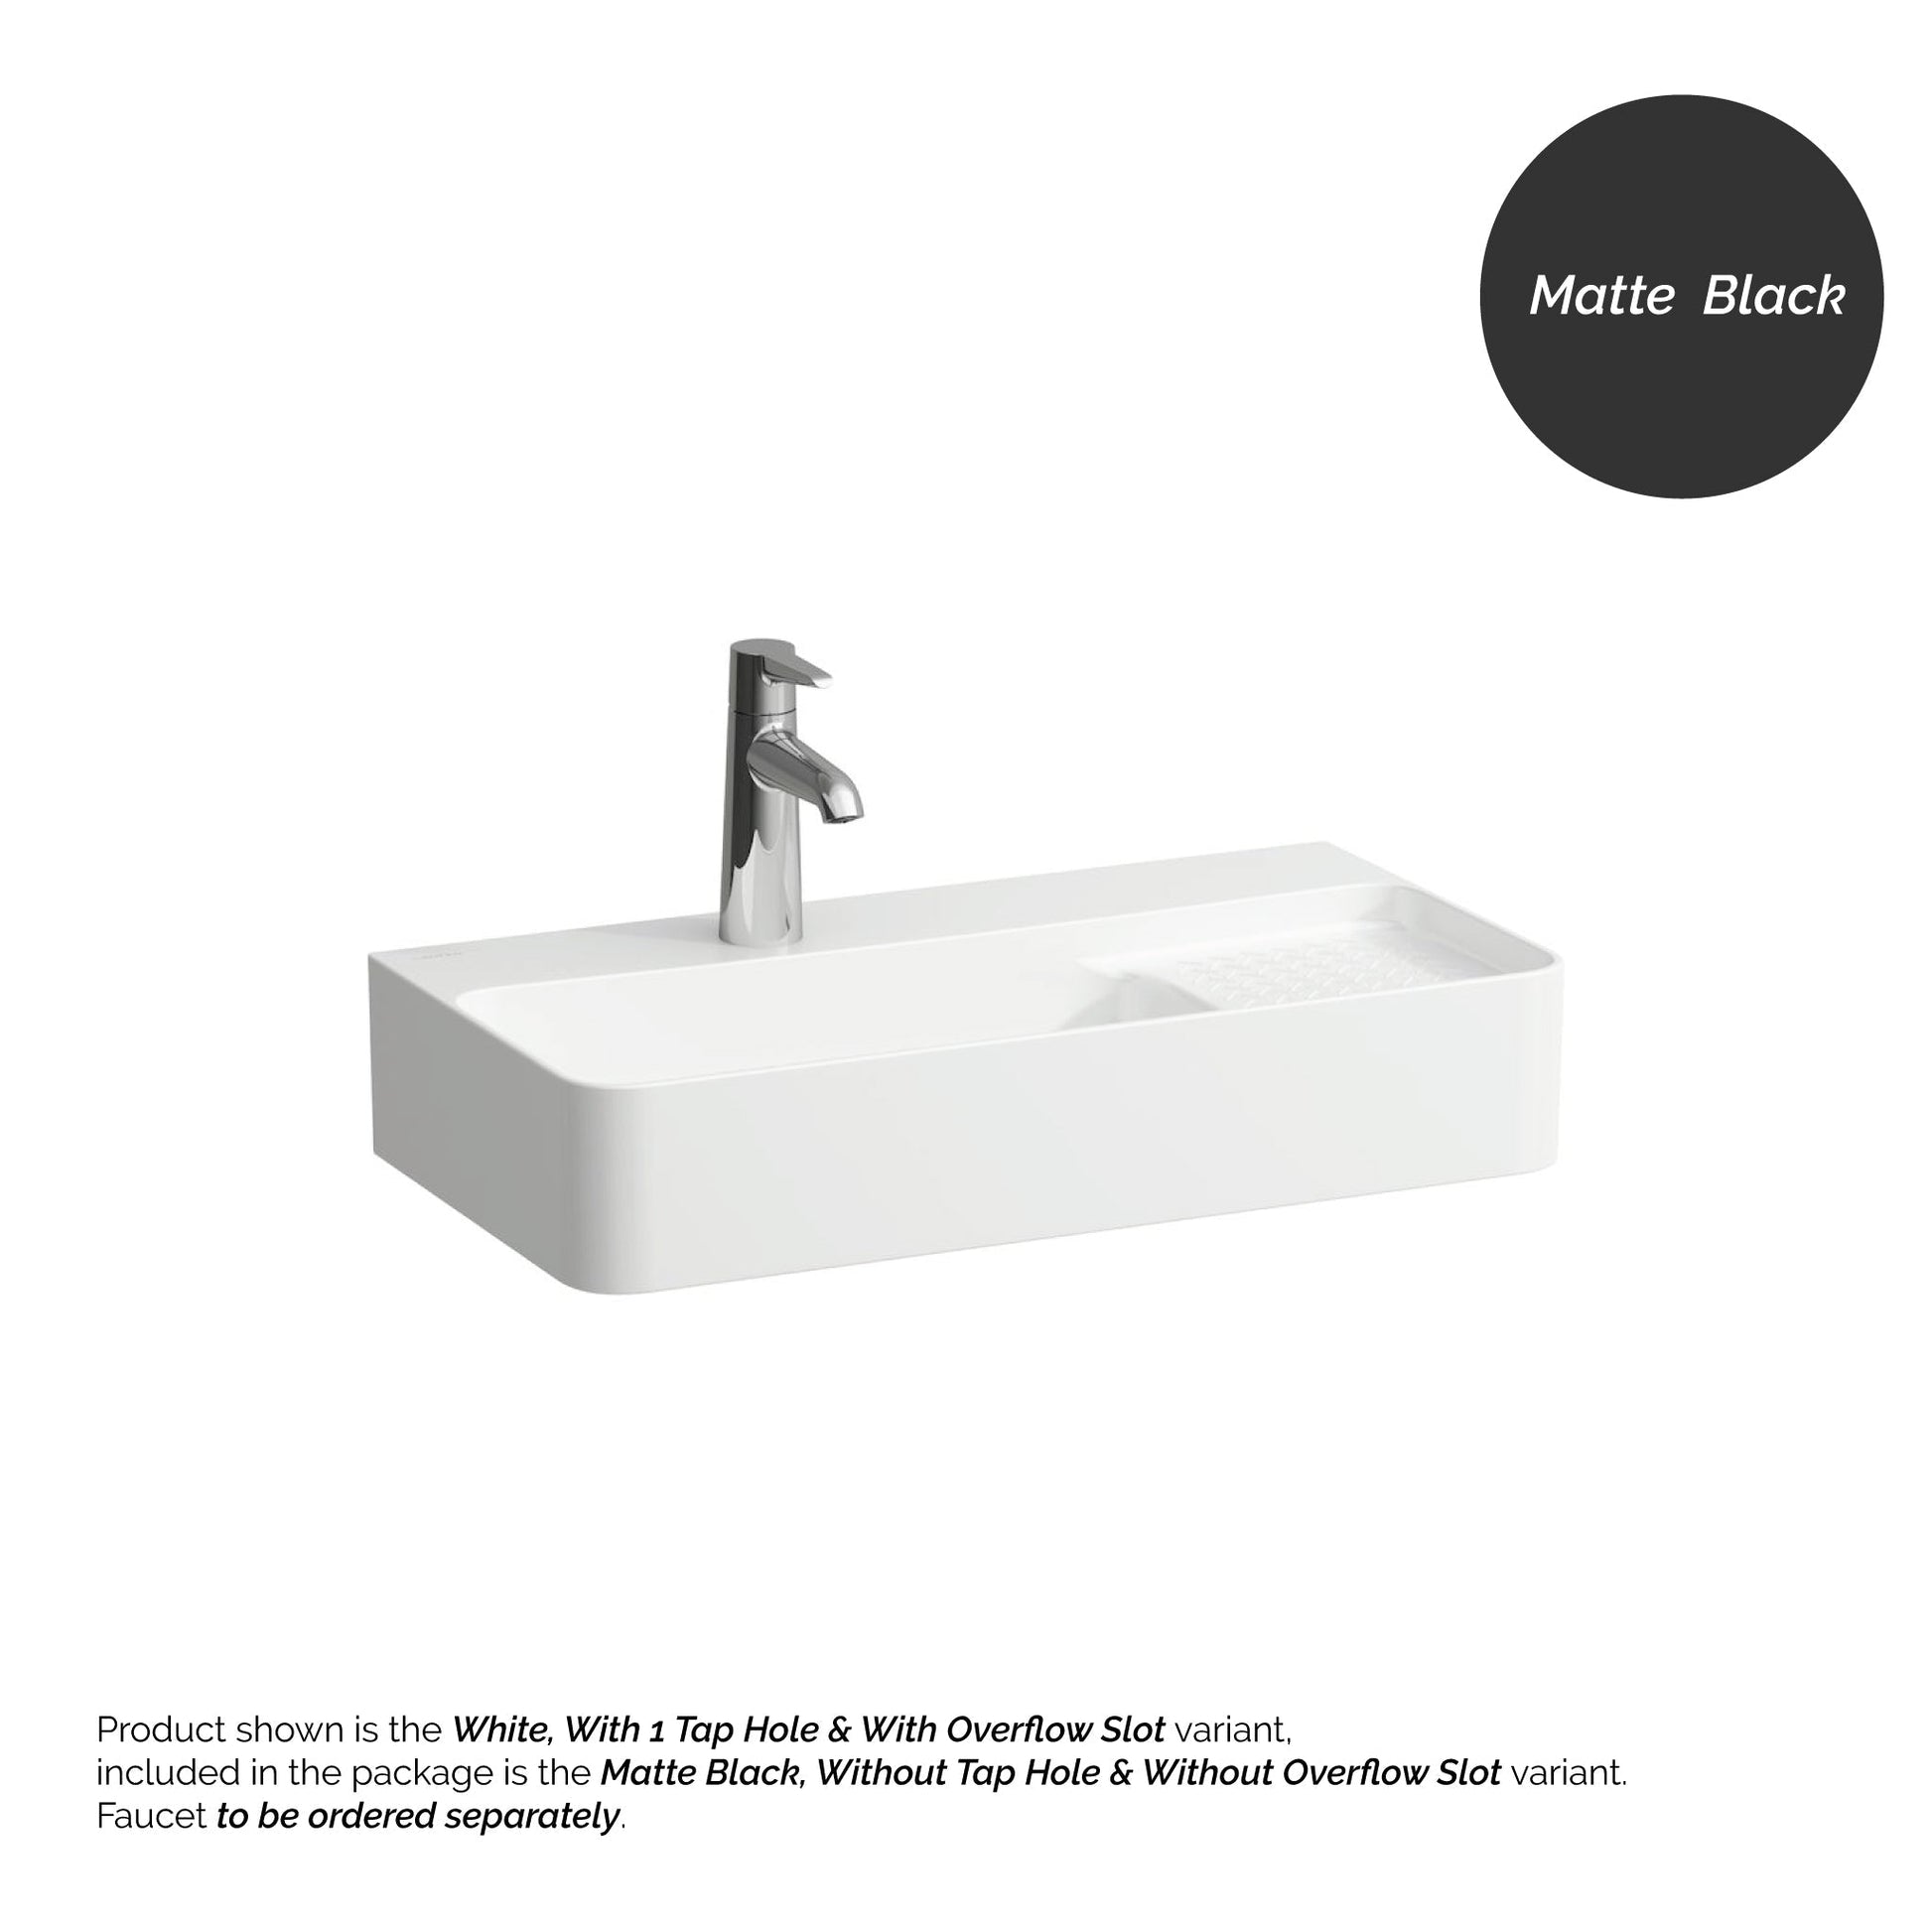 Laufen Val 24" x 12" Rectangular Matte Black Wall-Mounted Bathroom Sink Without Facuet Holes and Overflow Slot